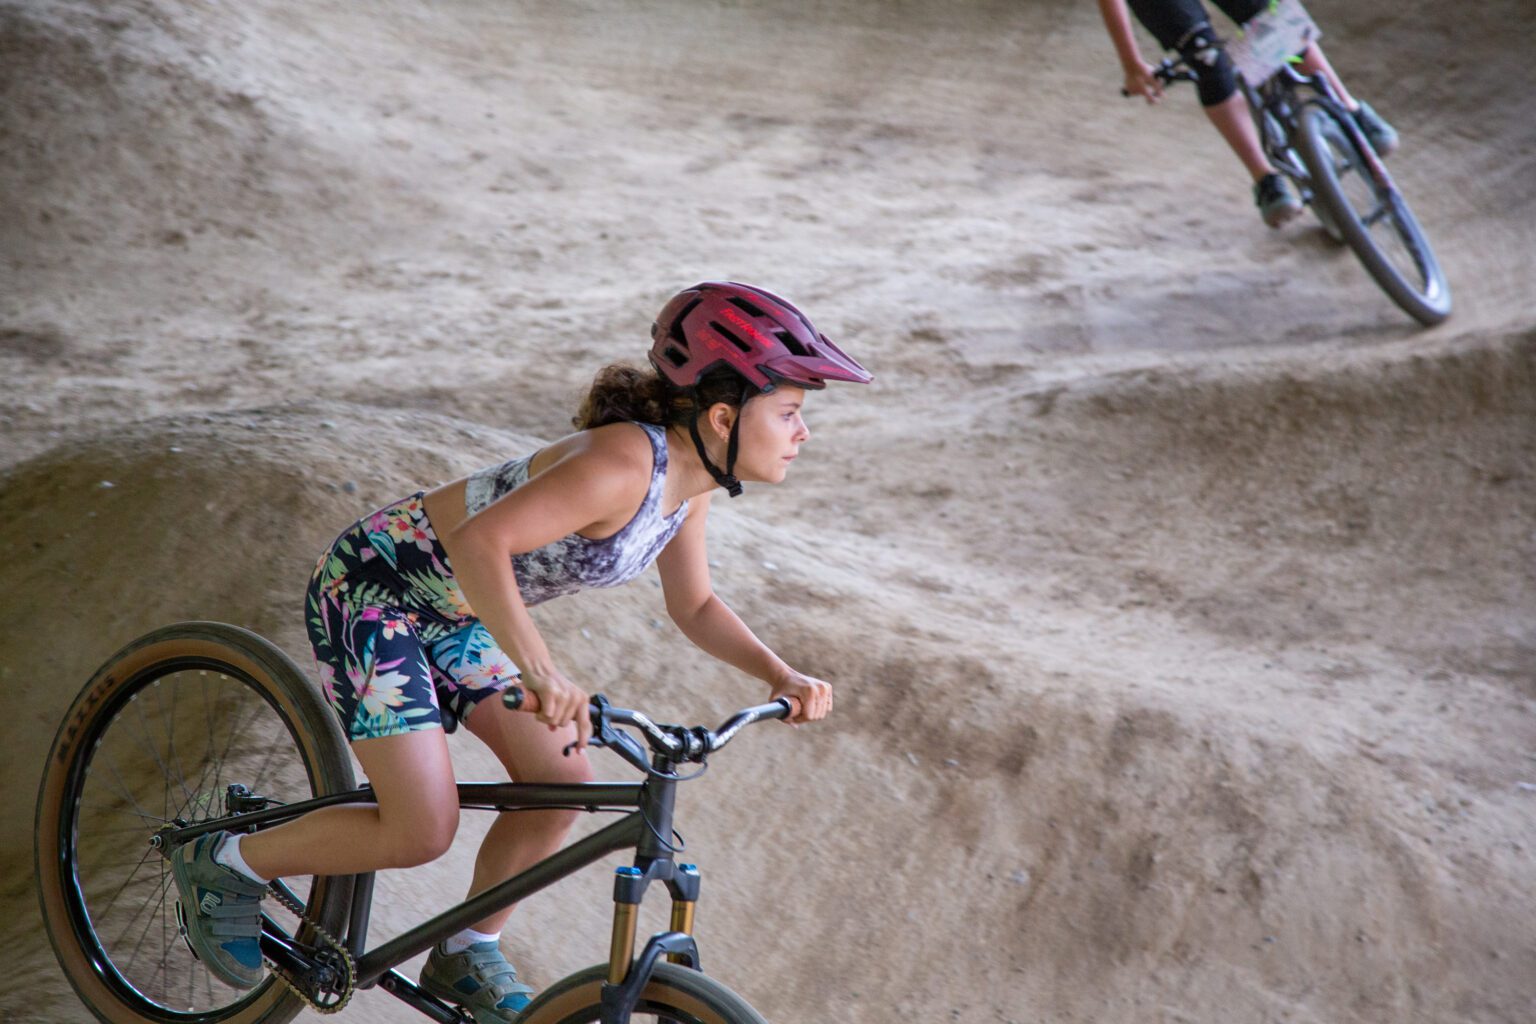 The Radical Rippers wind through the pump track at the Bike Ranch.